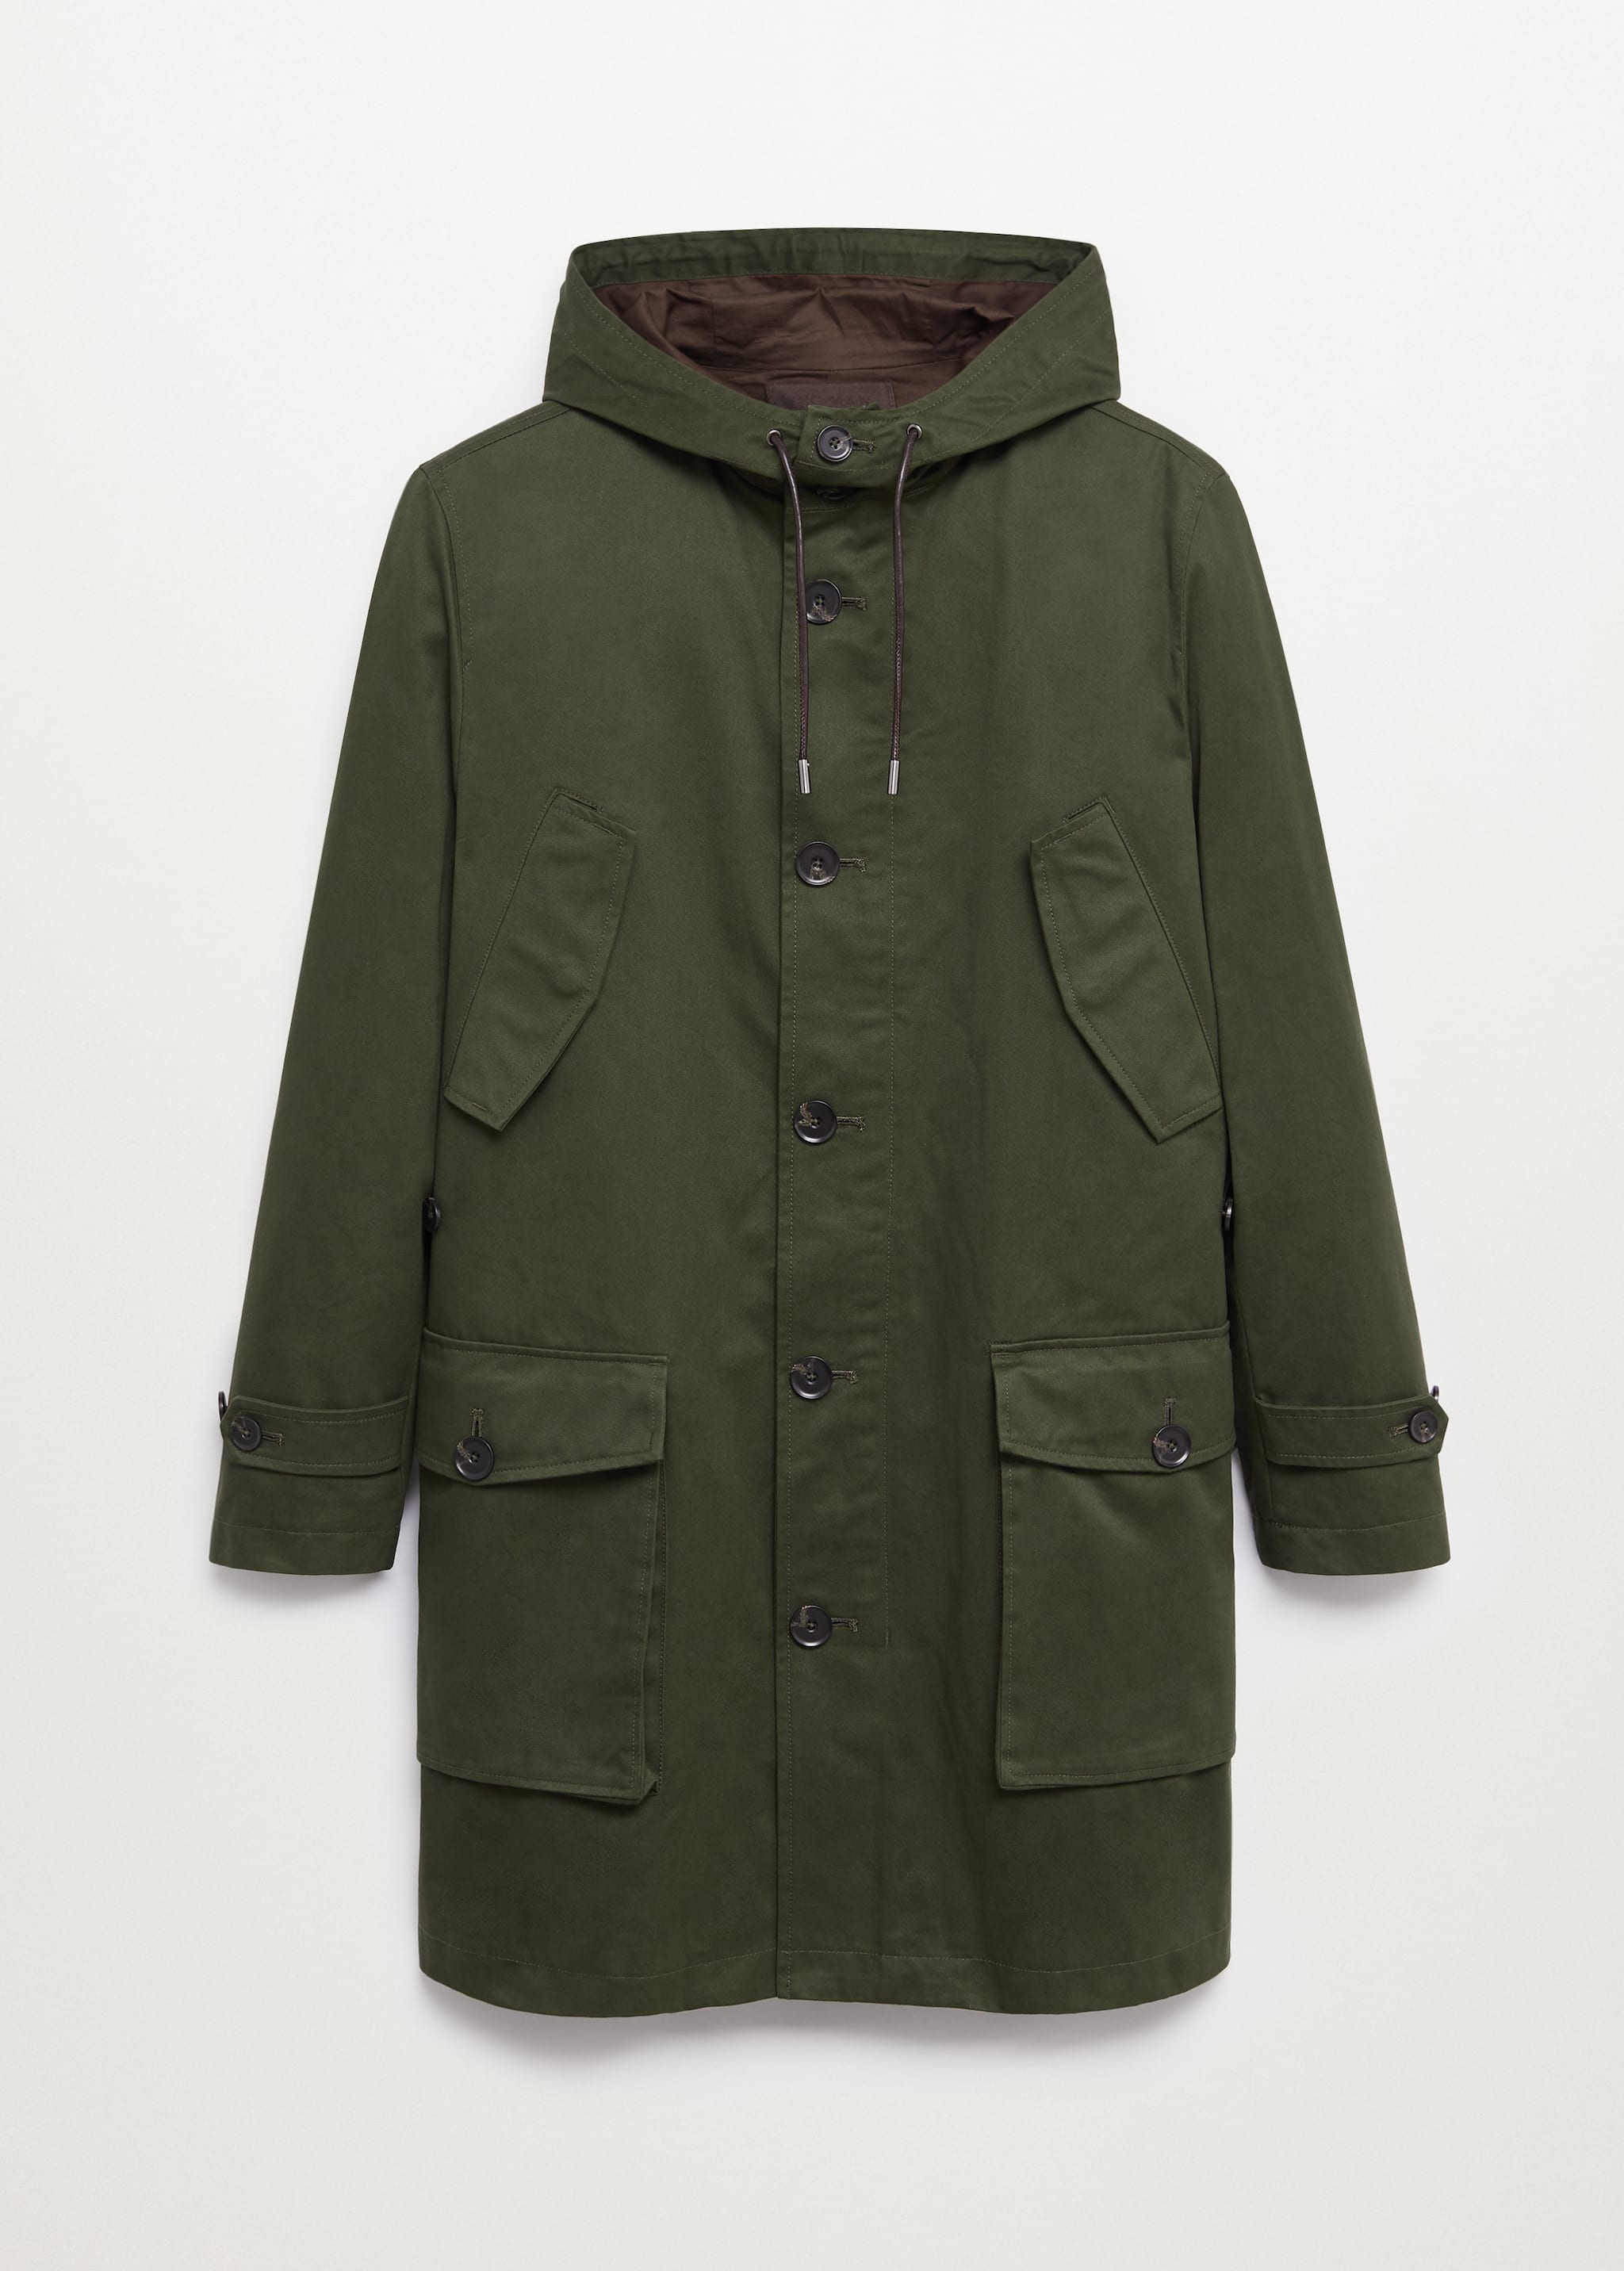 Pockets cotton parka - Article without model